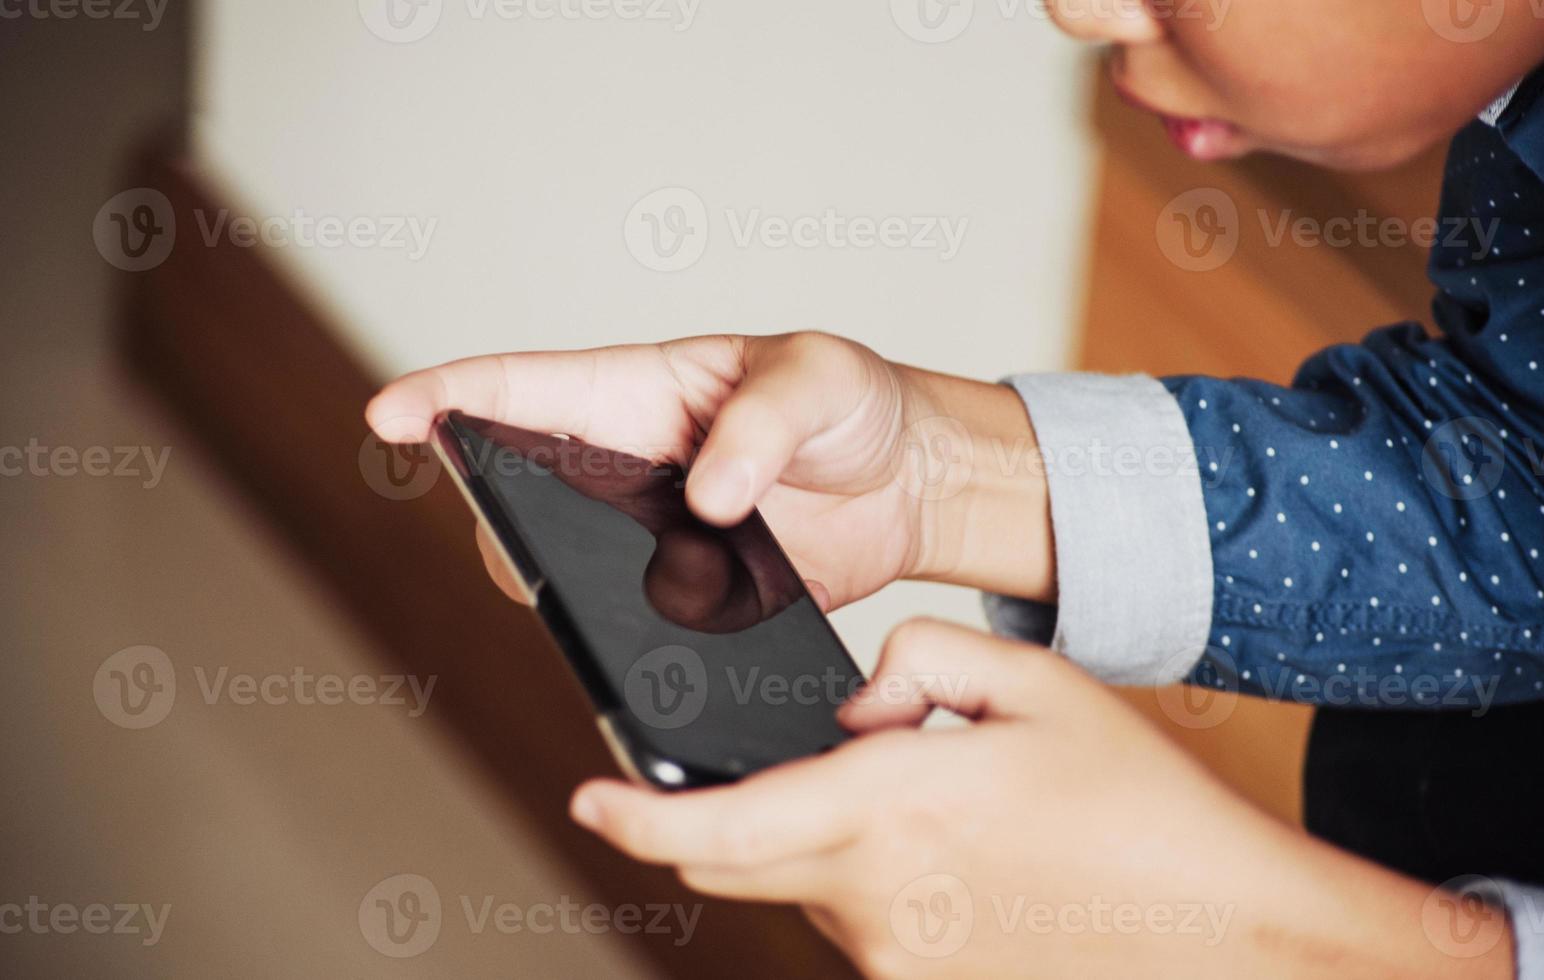 Boy playing games on smartphones, Boy hand holding a smartphone photo